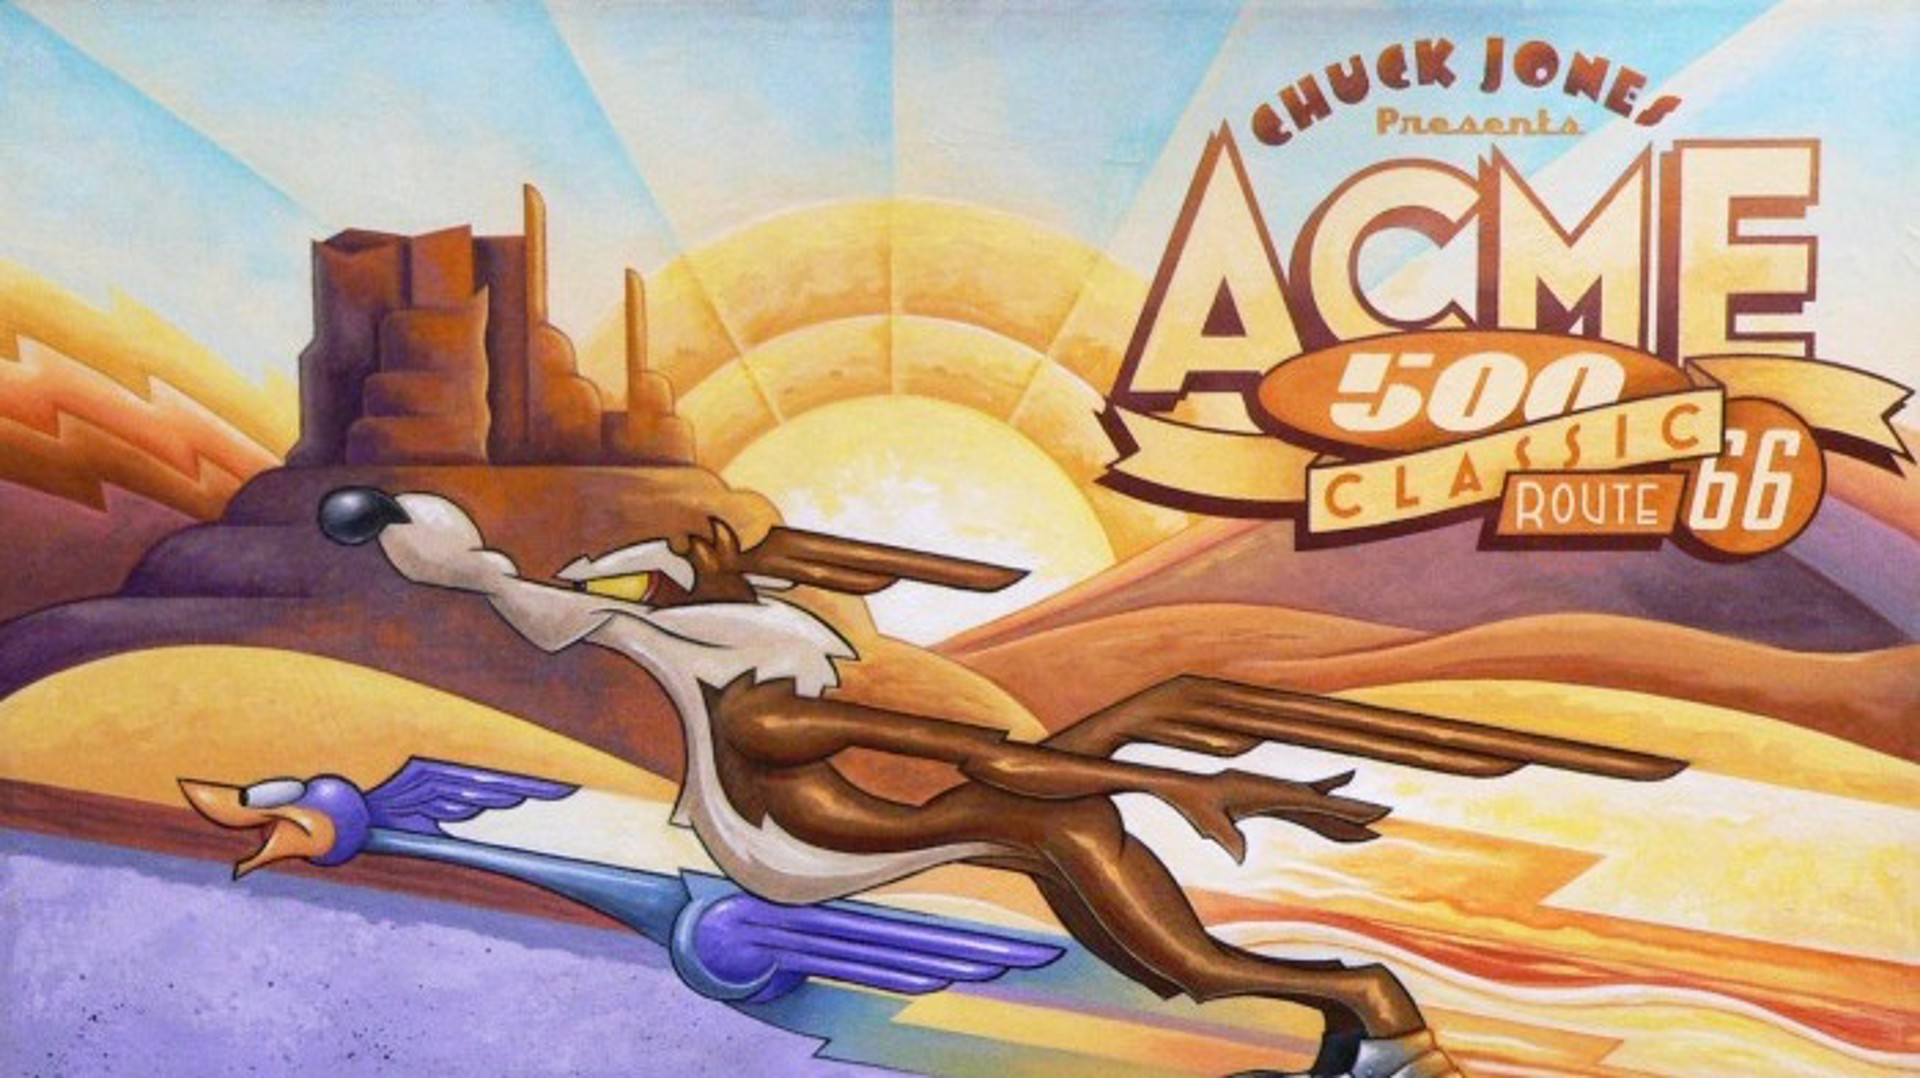 Acme 500 MKLE002 by Mike Kungl (Chuck Jones Collection)